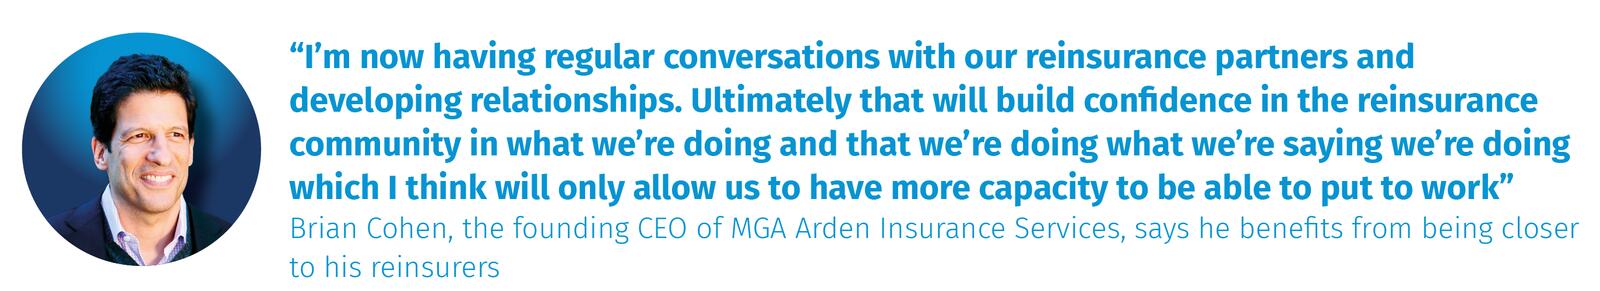 Brian Cohen, the founding CEO of MGA Arden Insurance Services, says he benefits from being closer to his reinsurers